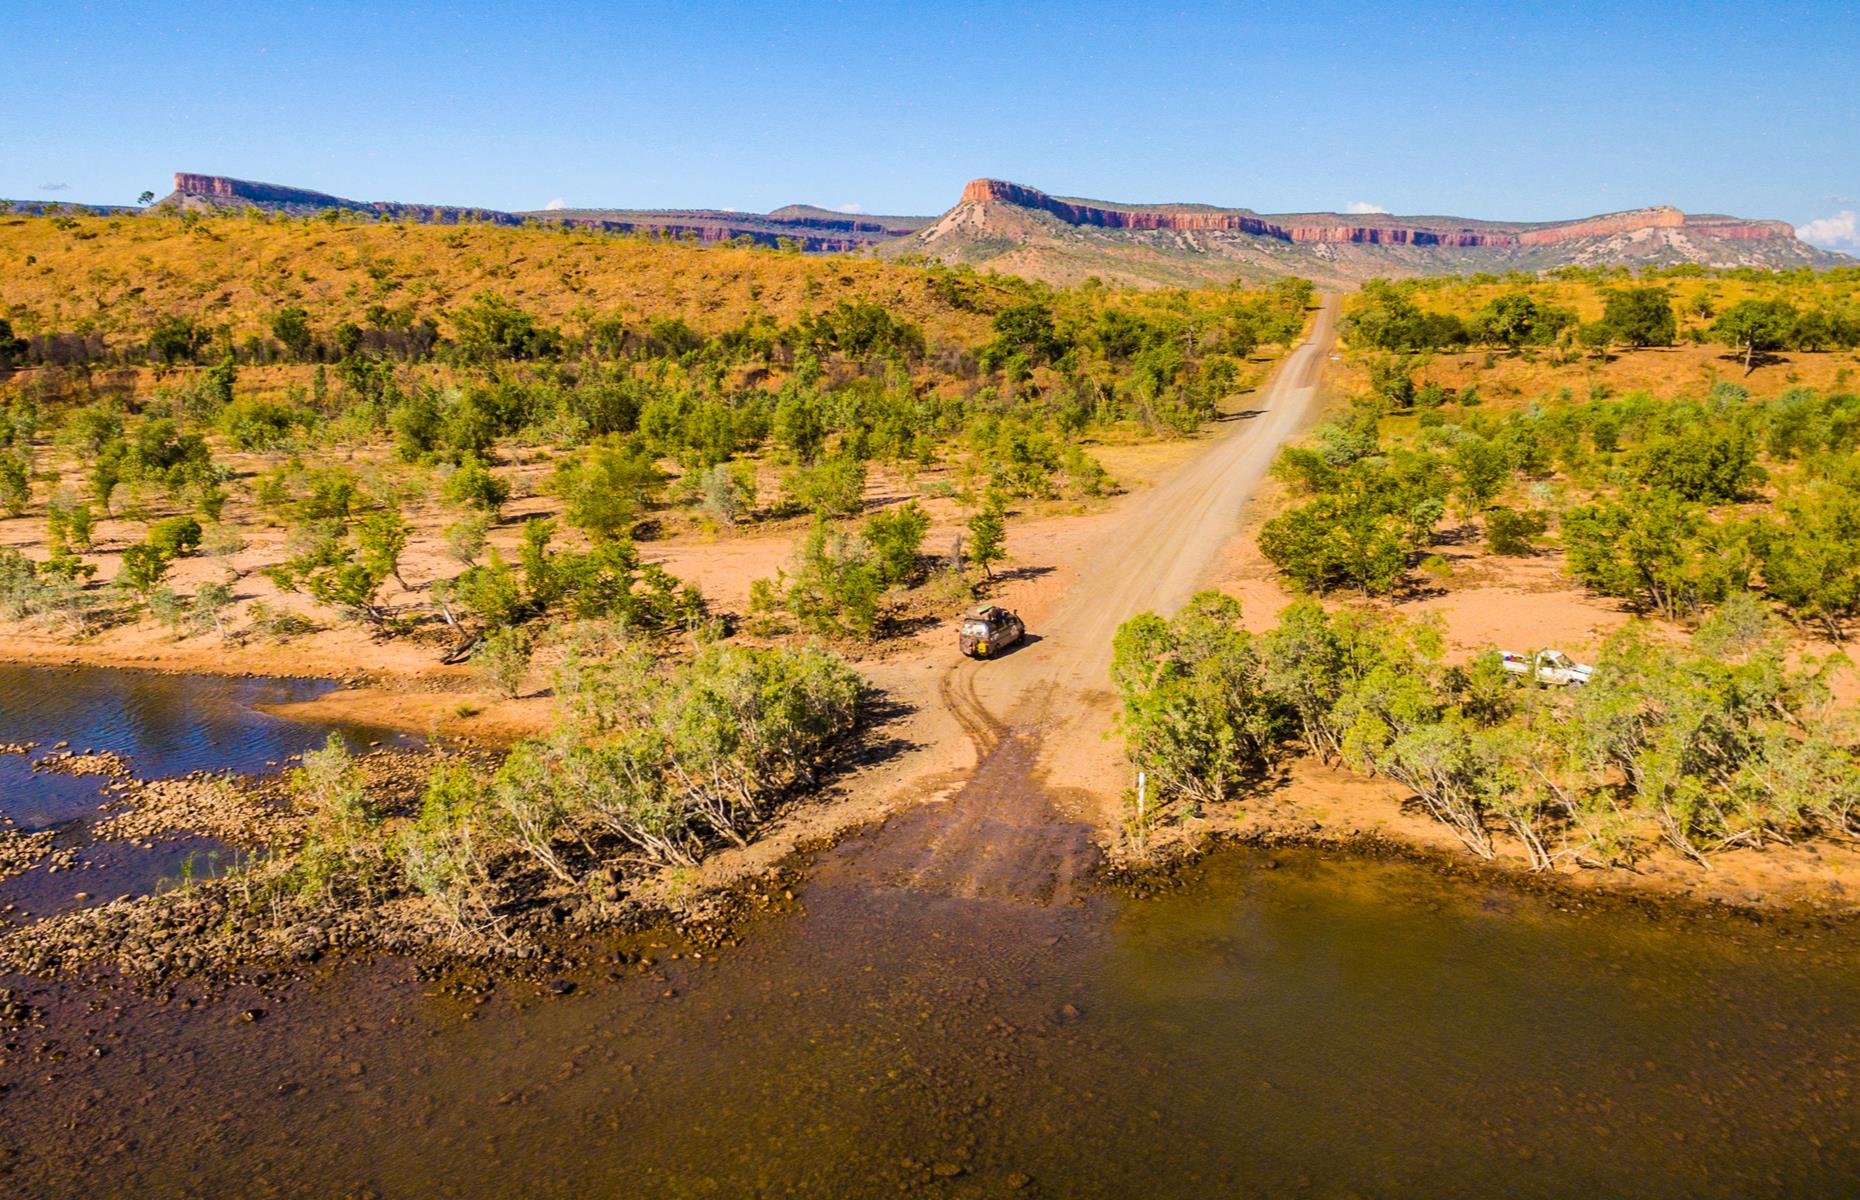 <p>The 410-mile (660km) <a href="https://www.australia.com/en-gb/trips-and-itineraries/broome-and-surrounds/the-gibb-river-road-itinerary.html">Gibb River Road</a> is one of Australia’s most legendary four-wheel drive routes, cutting through some of its most remarkable scenery. Accessible only between April and October, the challenging track (which has been sealed in sections recently) is a short cut between Derby in the west Kimberley and Kununurra in the east, taking drivers into the heart of the northern Kimberley plateau. You can do the full route, best taken over 12 days, or explore parts on a long weekend.</p>